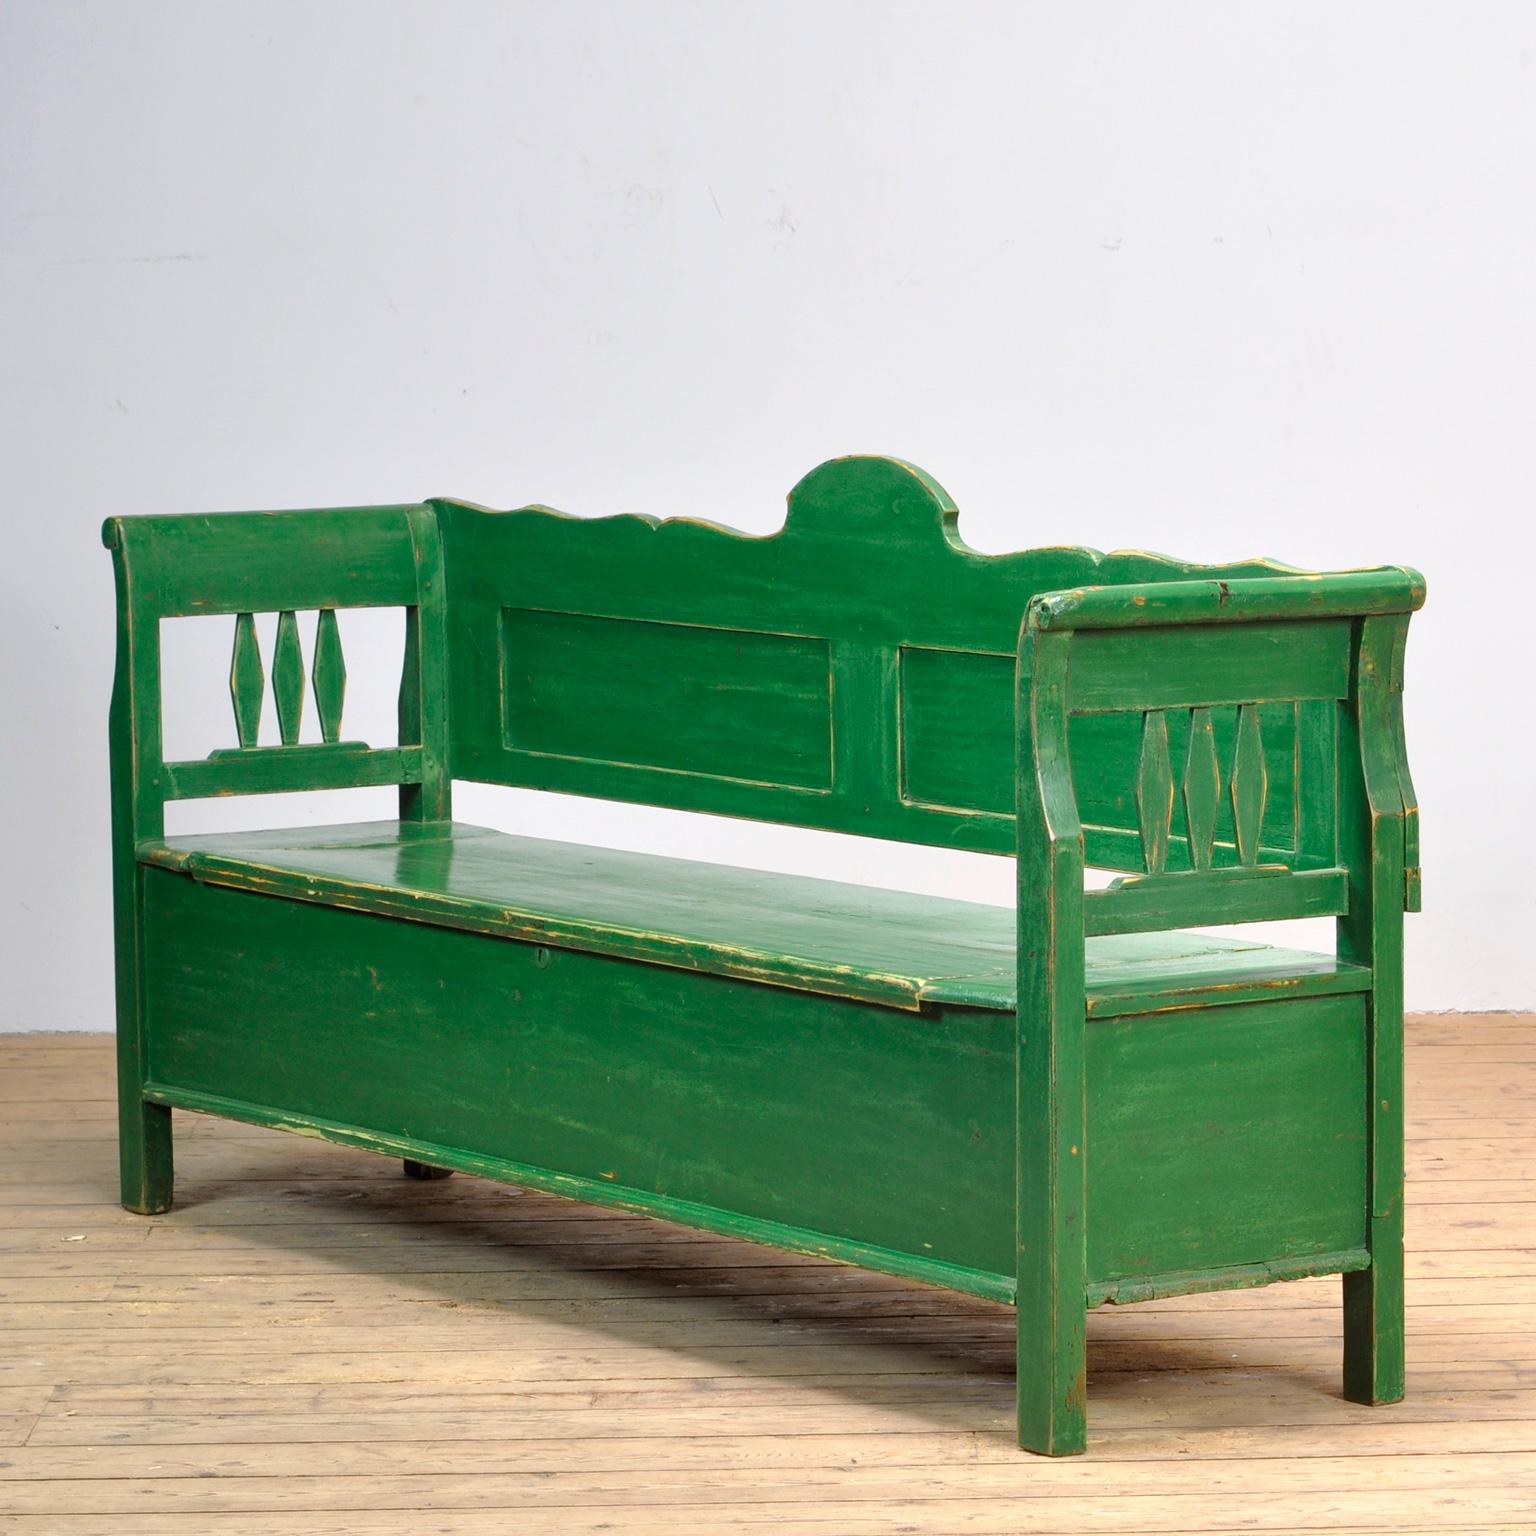 A charming bench from Hungary with the original paint. Over time and use, the green paint has been worn away in places to the wood. With storage space under the seat. The bench is stable and sturdy. Free of woodworm.
 